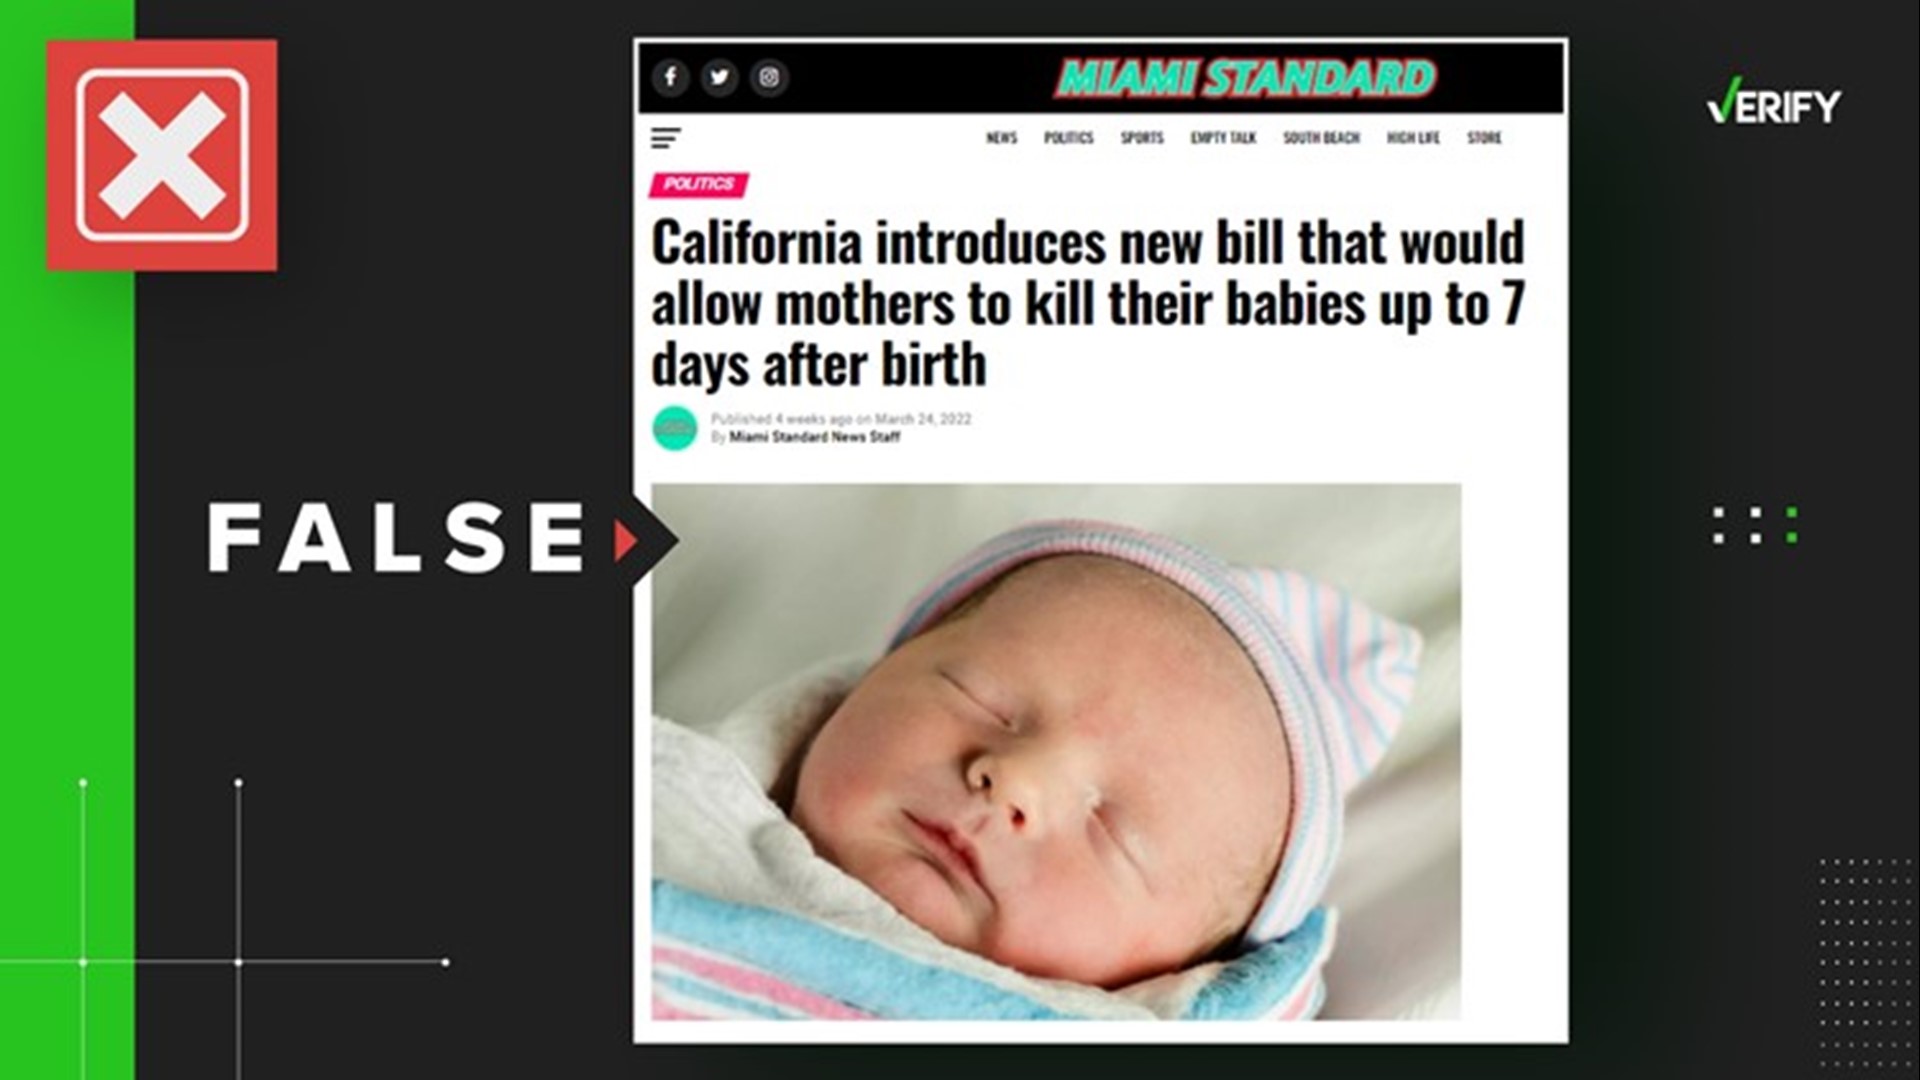 A California bill doesn’t legalize “infanticide,” as some social media users have claimed. Here’s what the bill actually says.